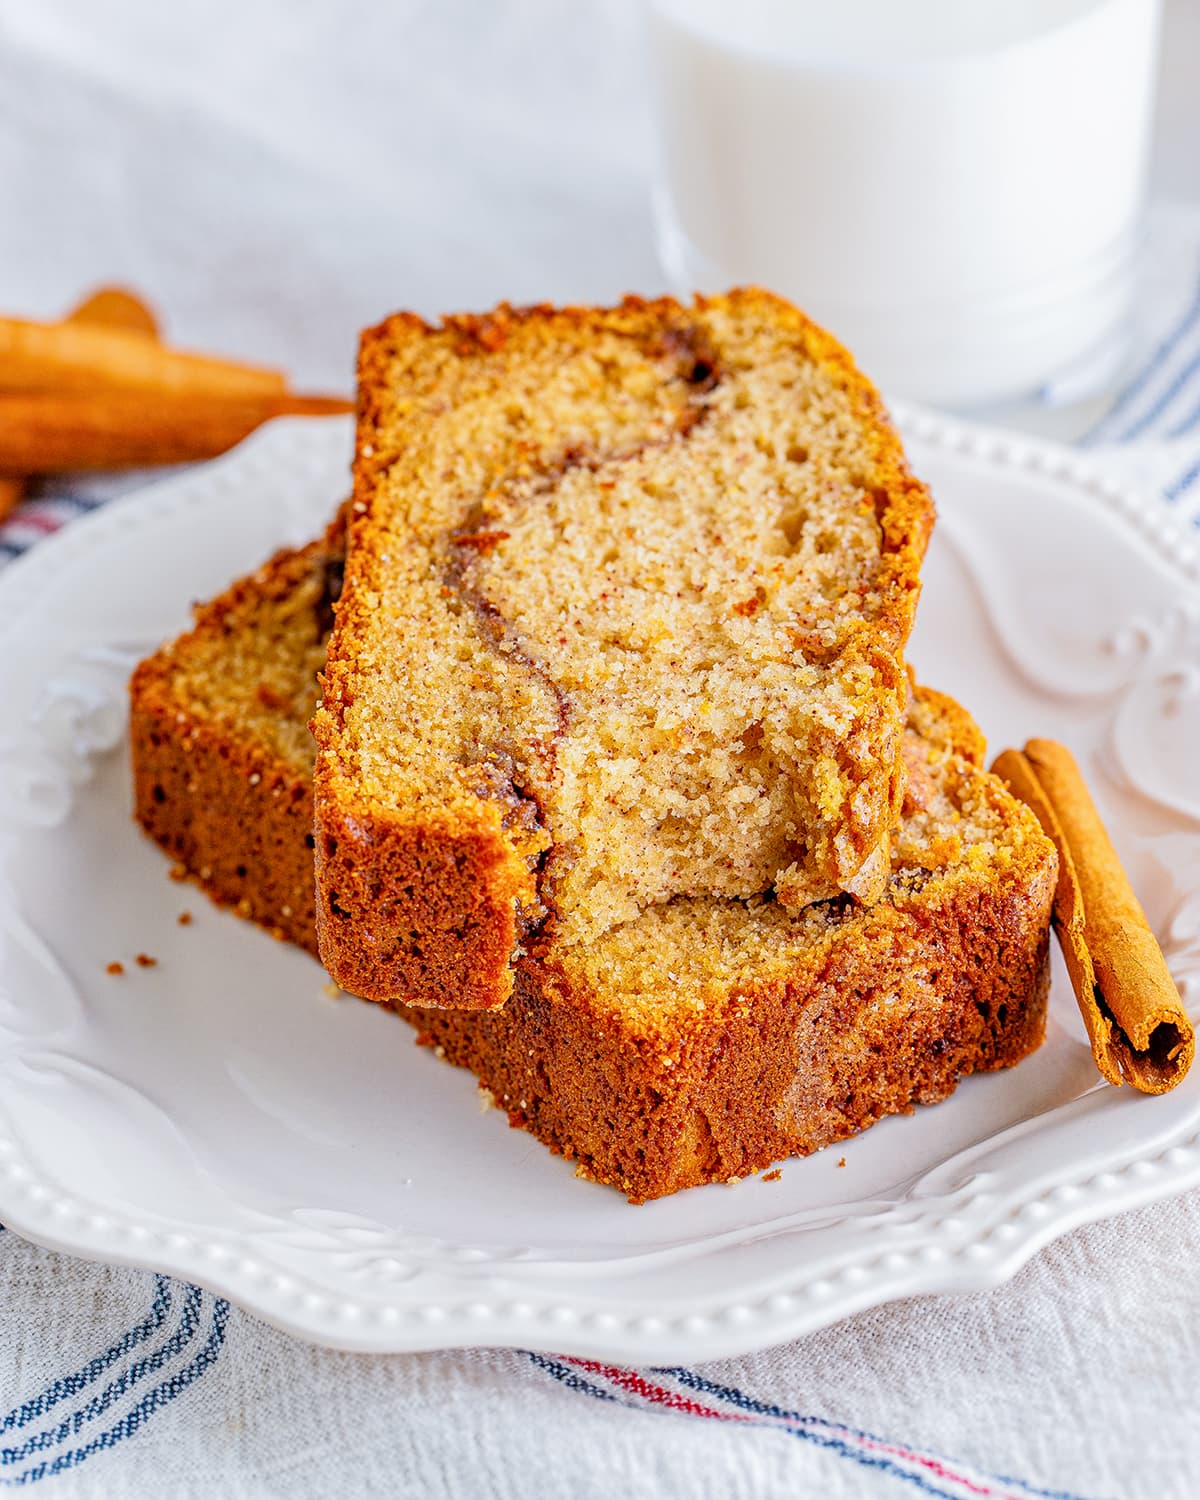 A stack of two pieces of cinnamon quick bread with a cinnamon swirl in the middle.